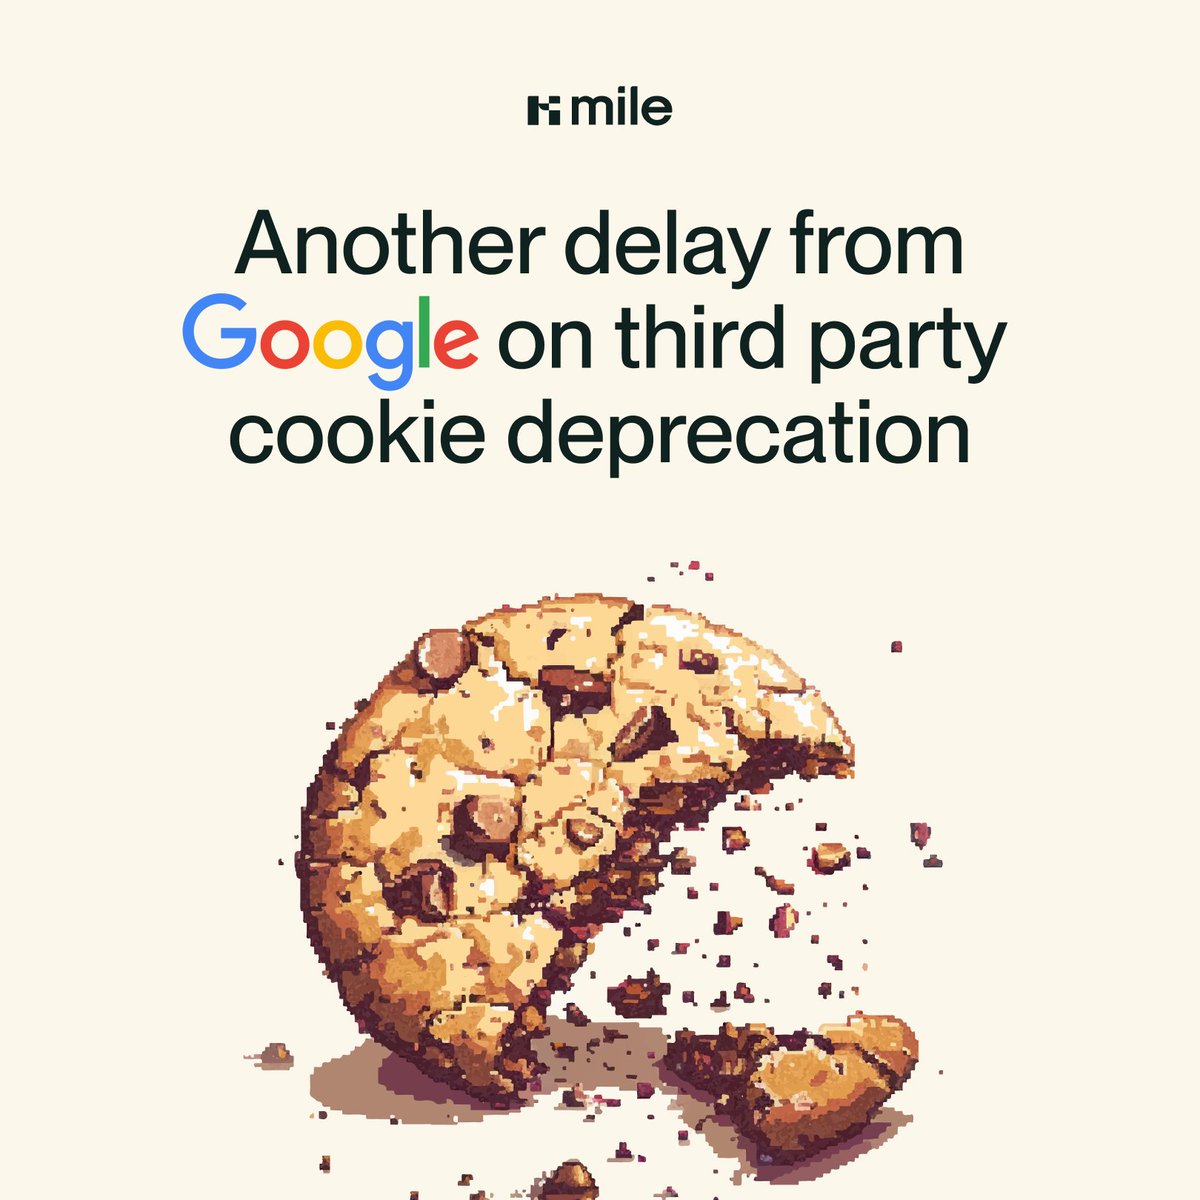 Look who’s back - it’s the #Cookies. Well, not entirely, but they’re going to stay with us a bit more.

@Google announced the delay in deprecation owing to the mixed opinion of ad-tech players around #PrivacySandbox.

What's your opinion on Privacy Sandbox?